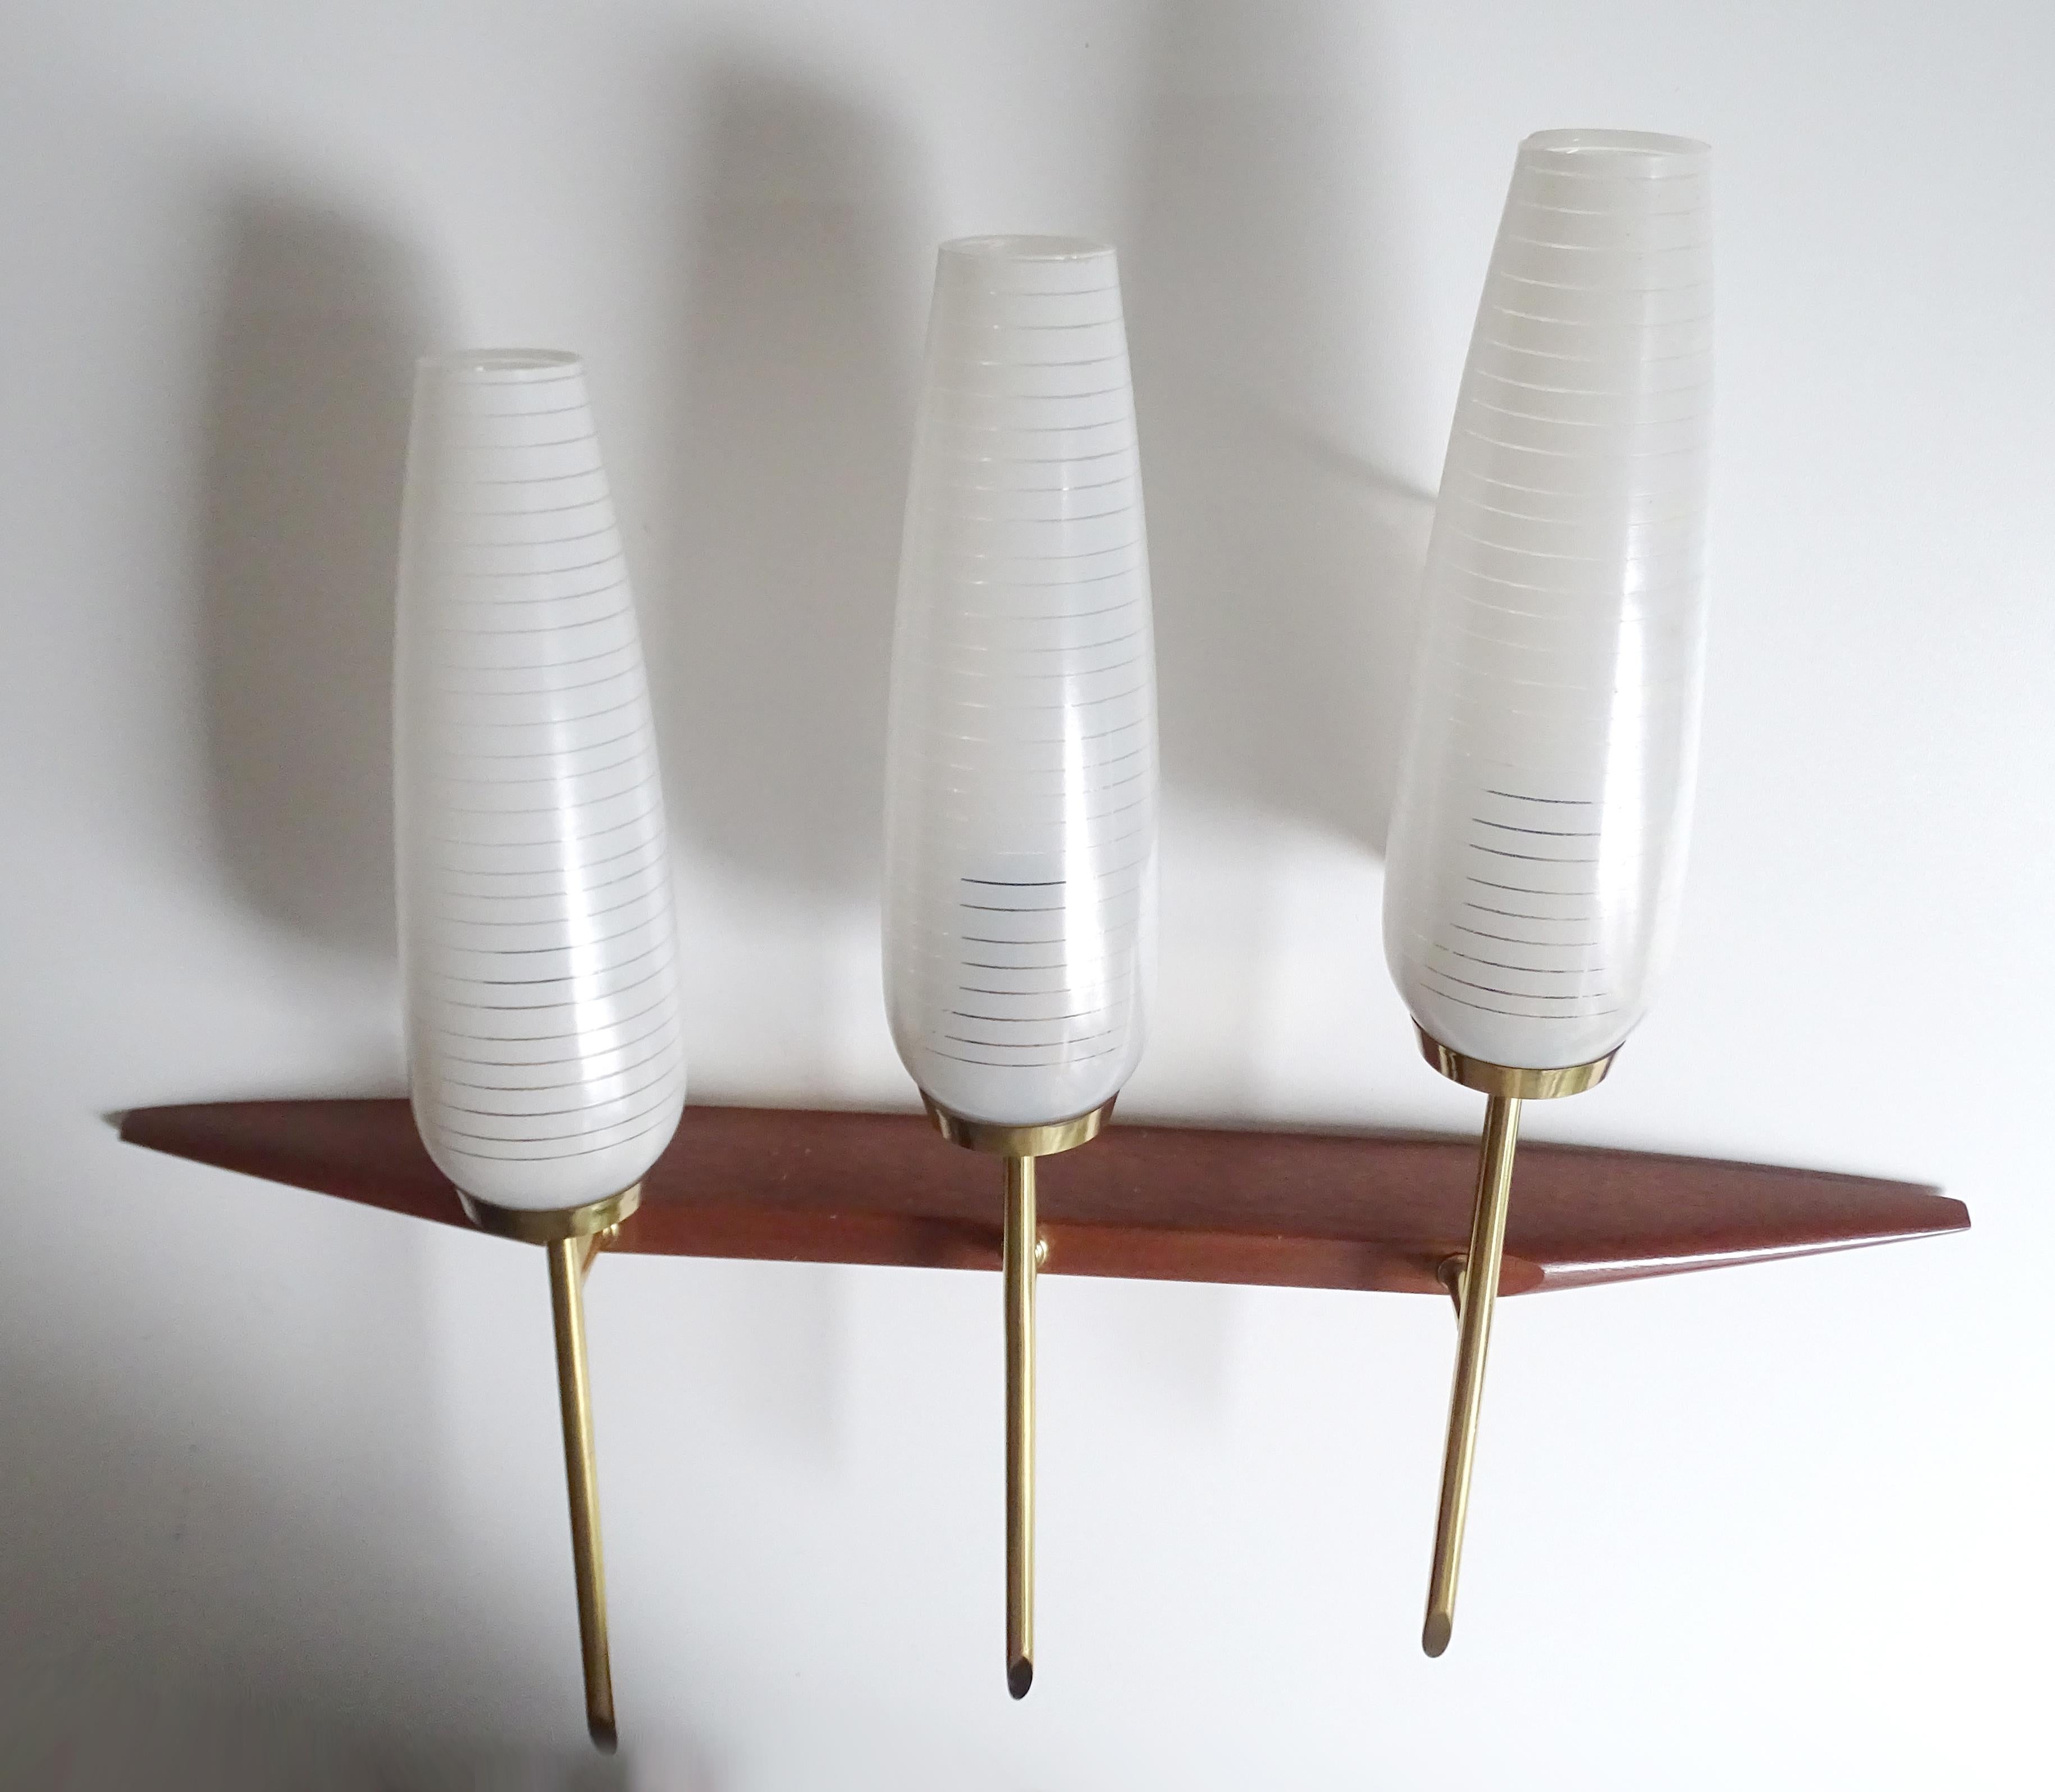 European  Pair of  French Mid Century Sconces, Maison Arlus, 1960s Danish Modern Style For Sale